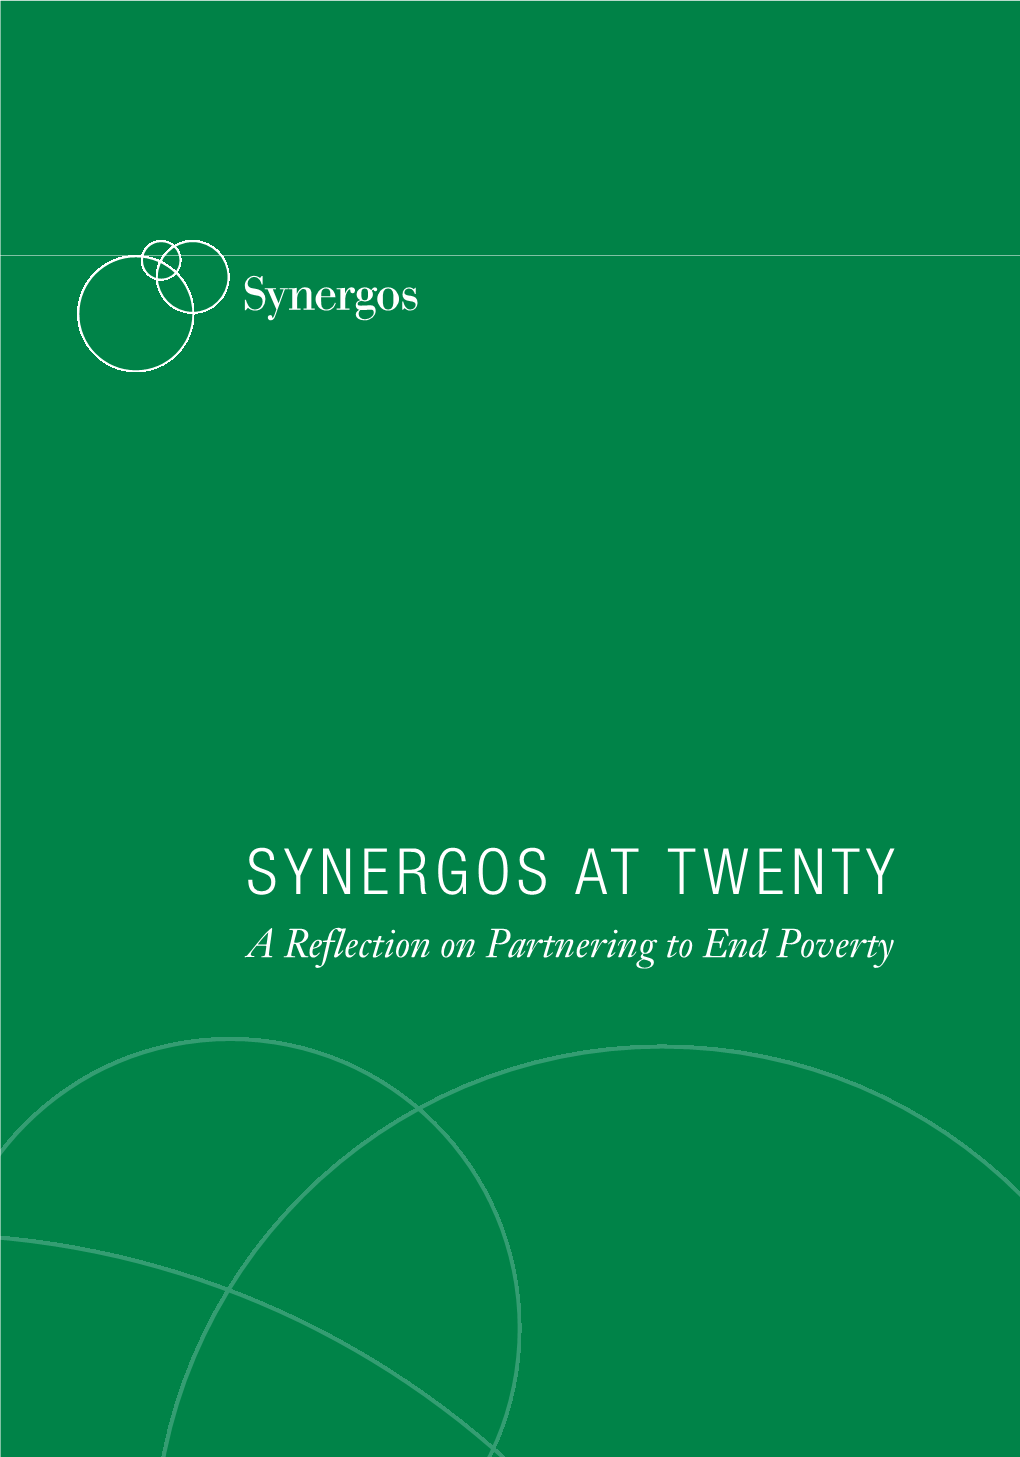 Synergos at Twenty: a Reflection on Partnering to End Poverty